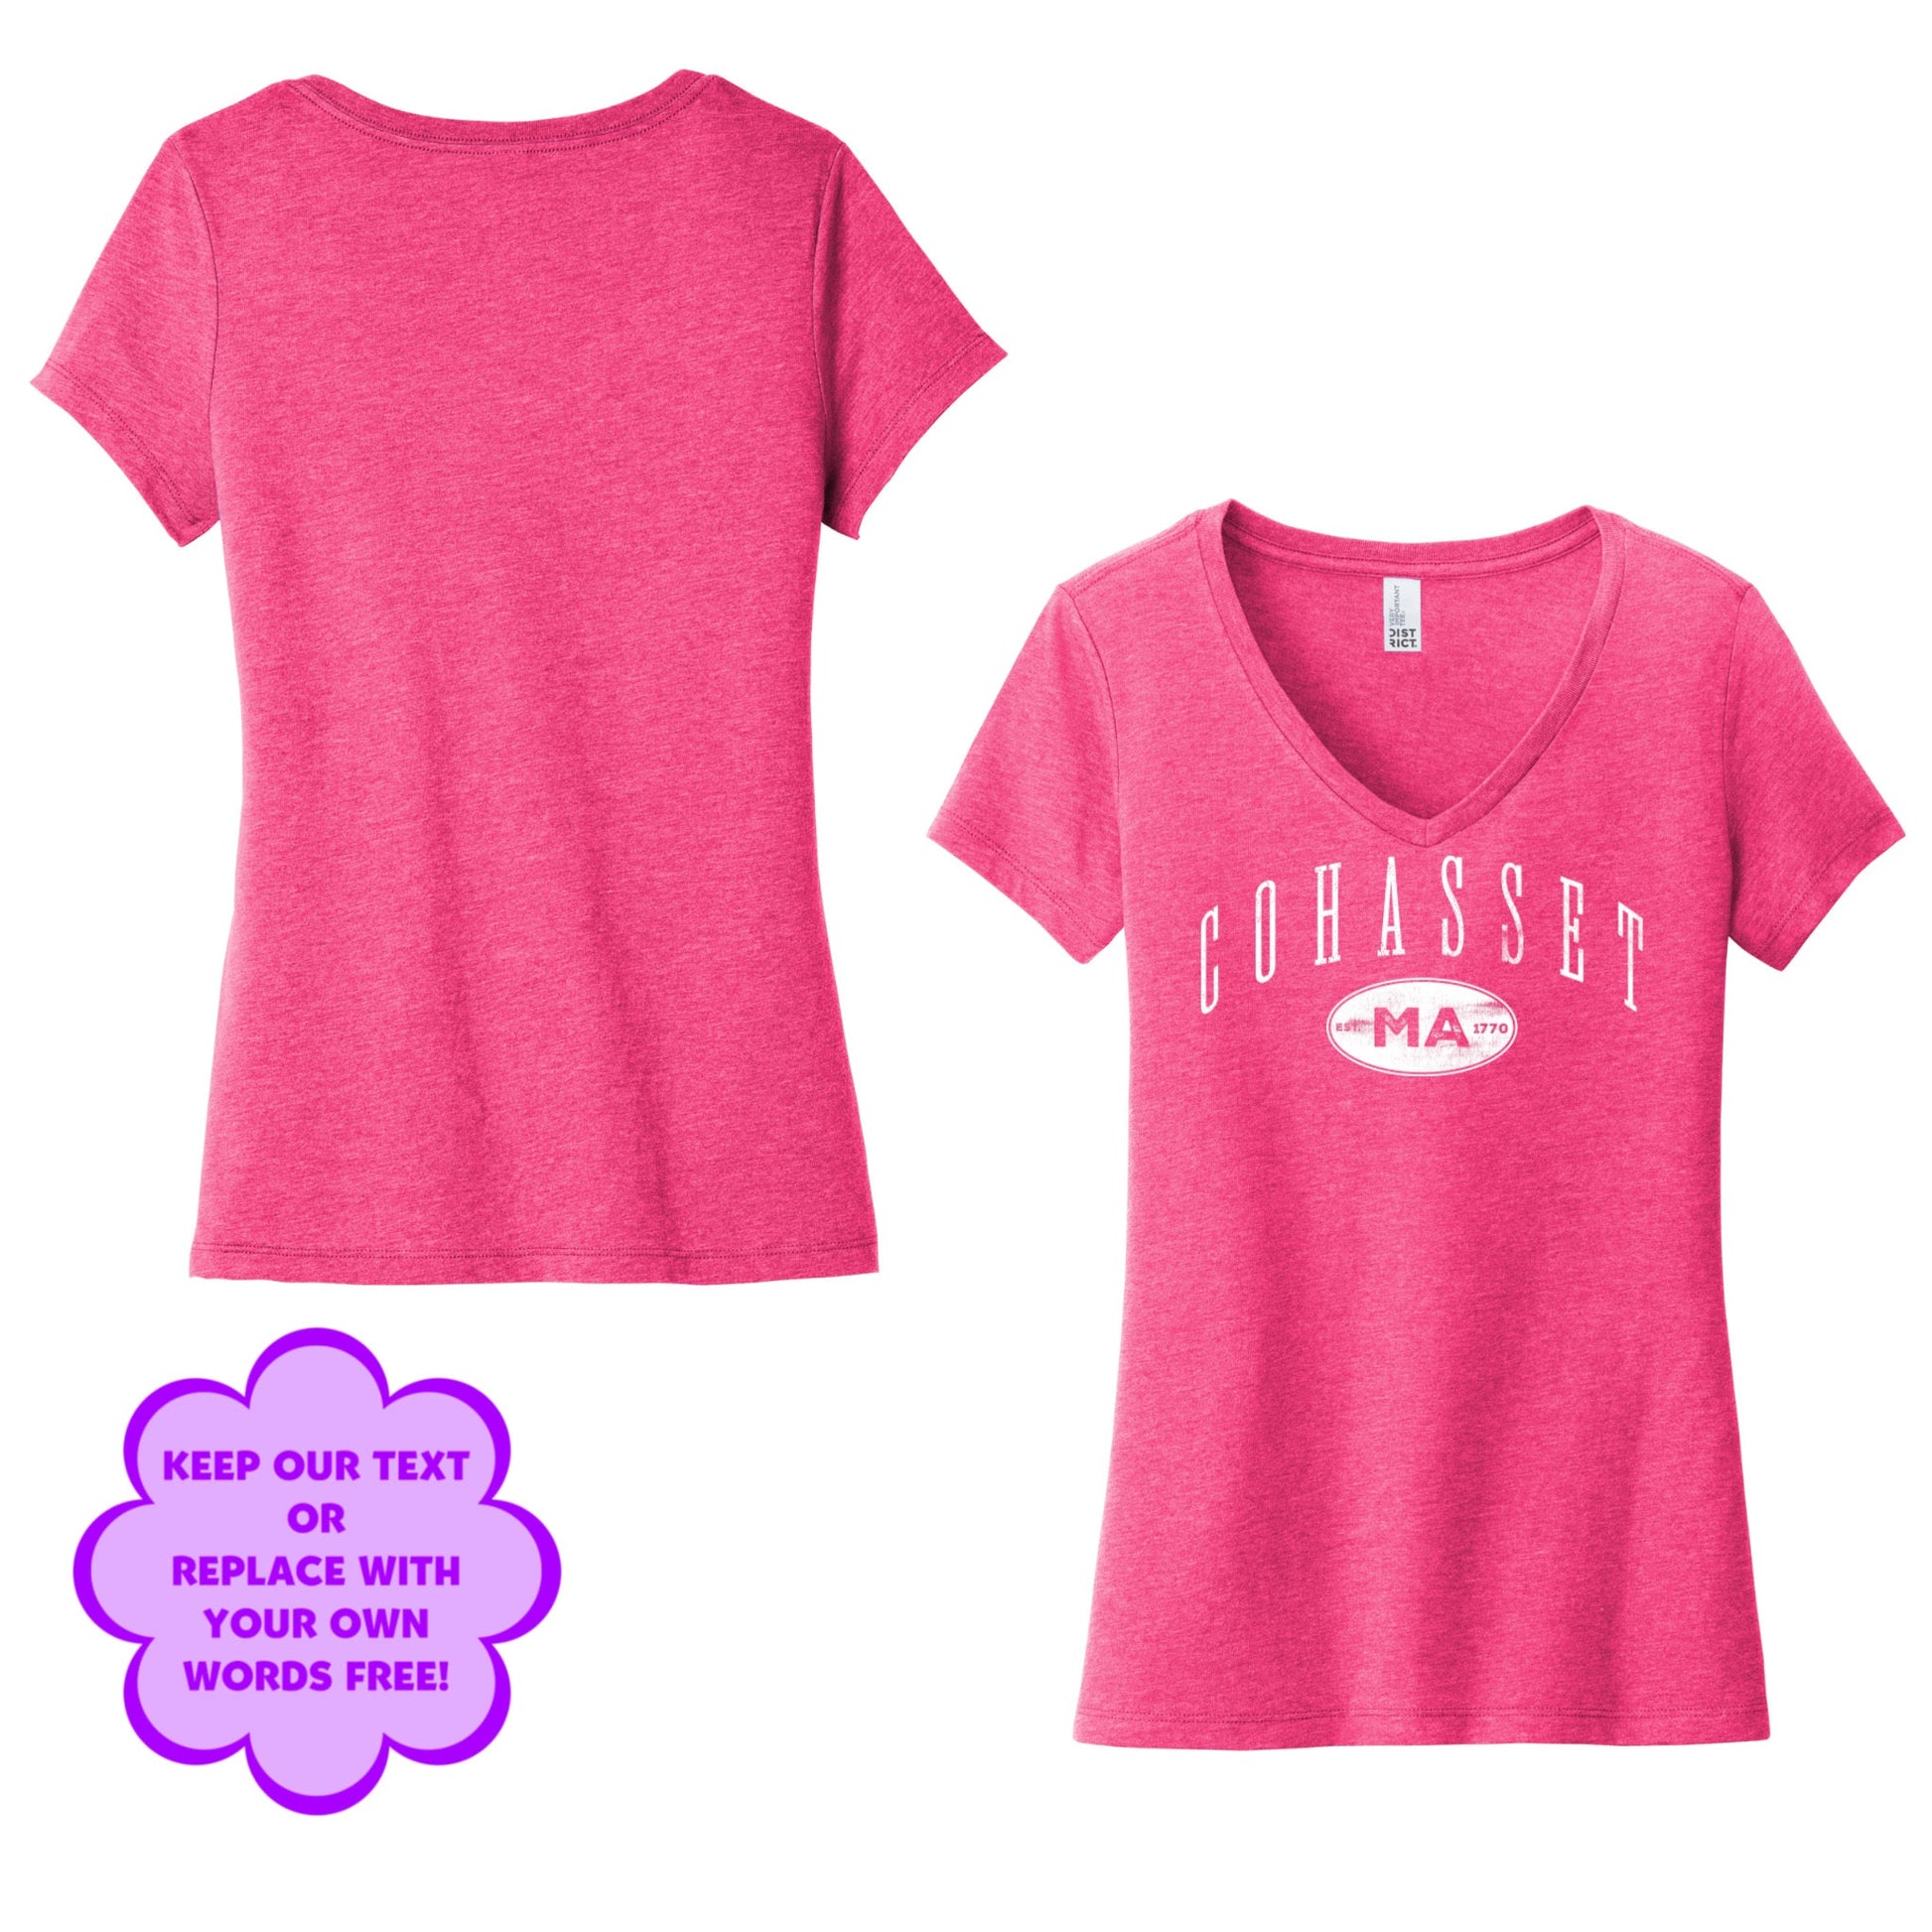 Personalize Free Cohasset MA, Women’s Cotton Tees from Baby Squid Ink 